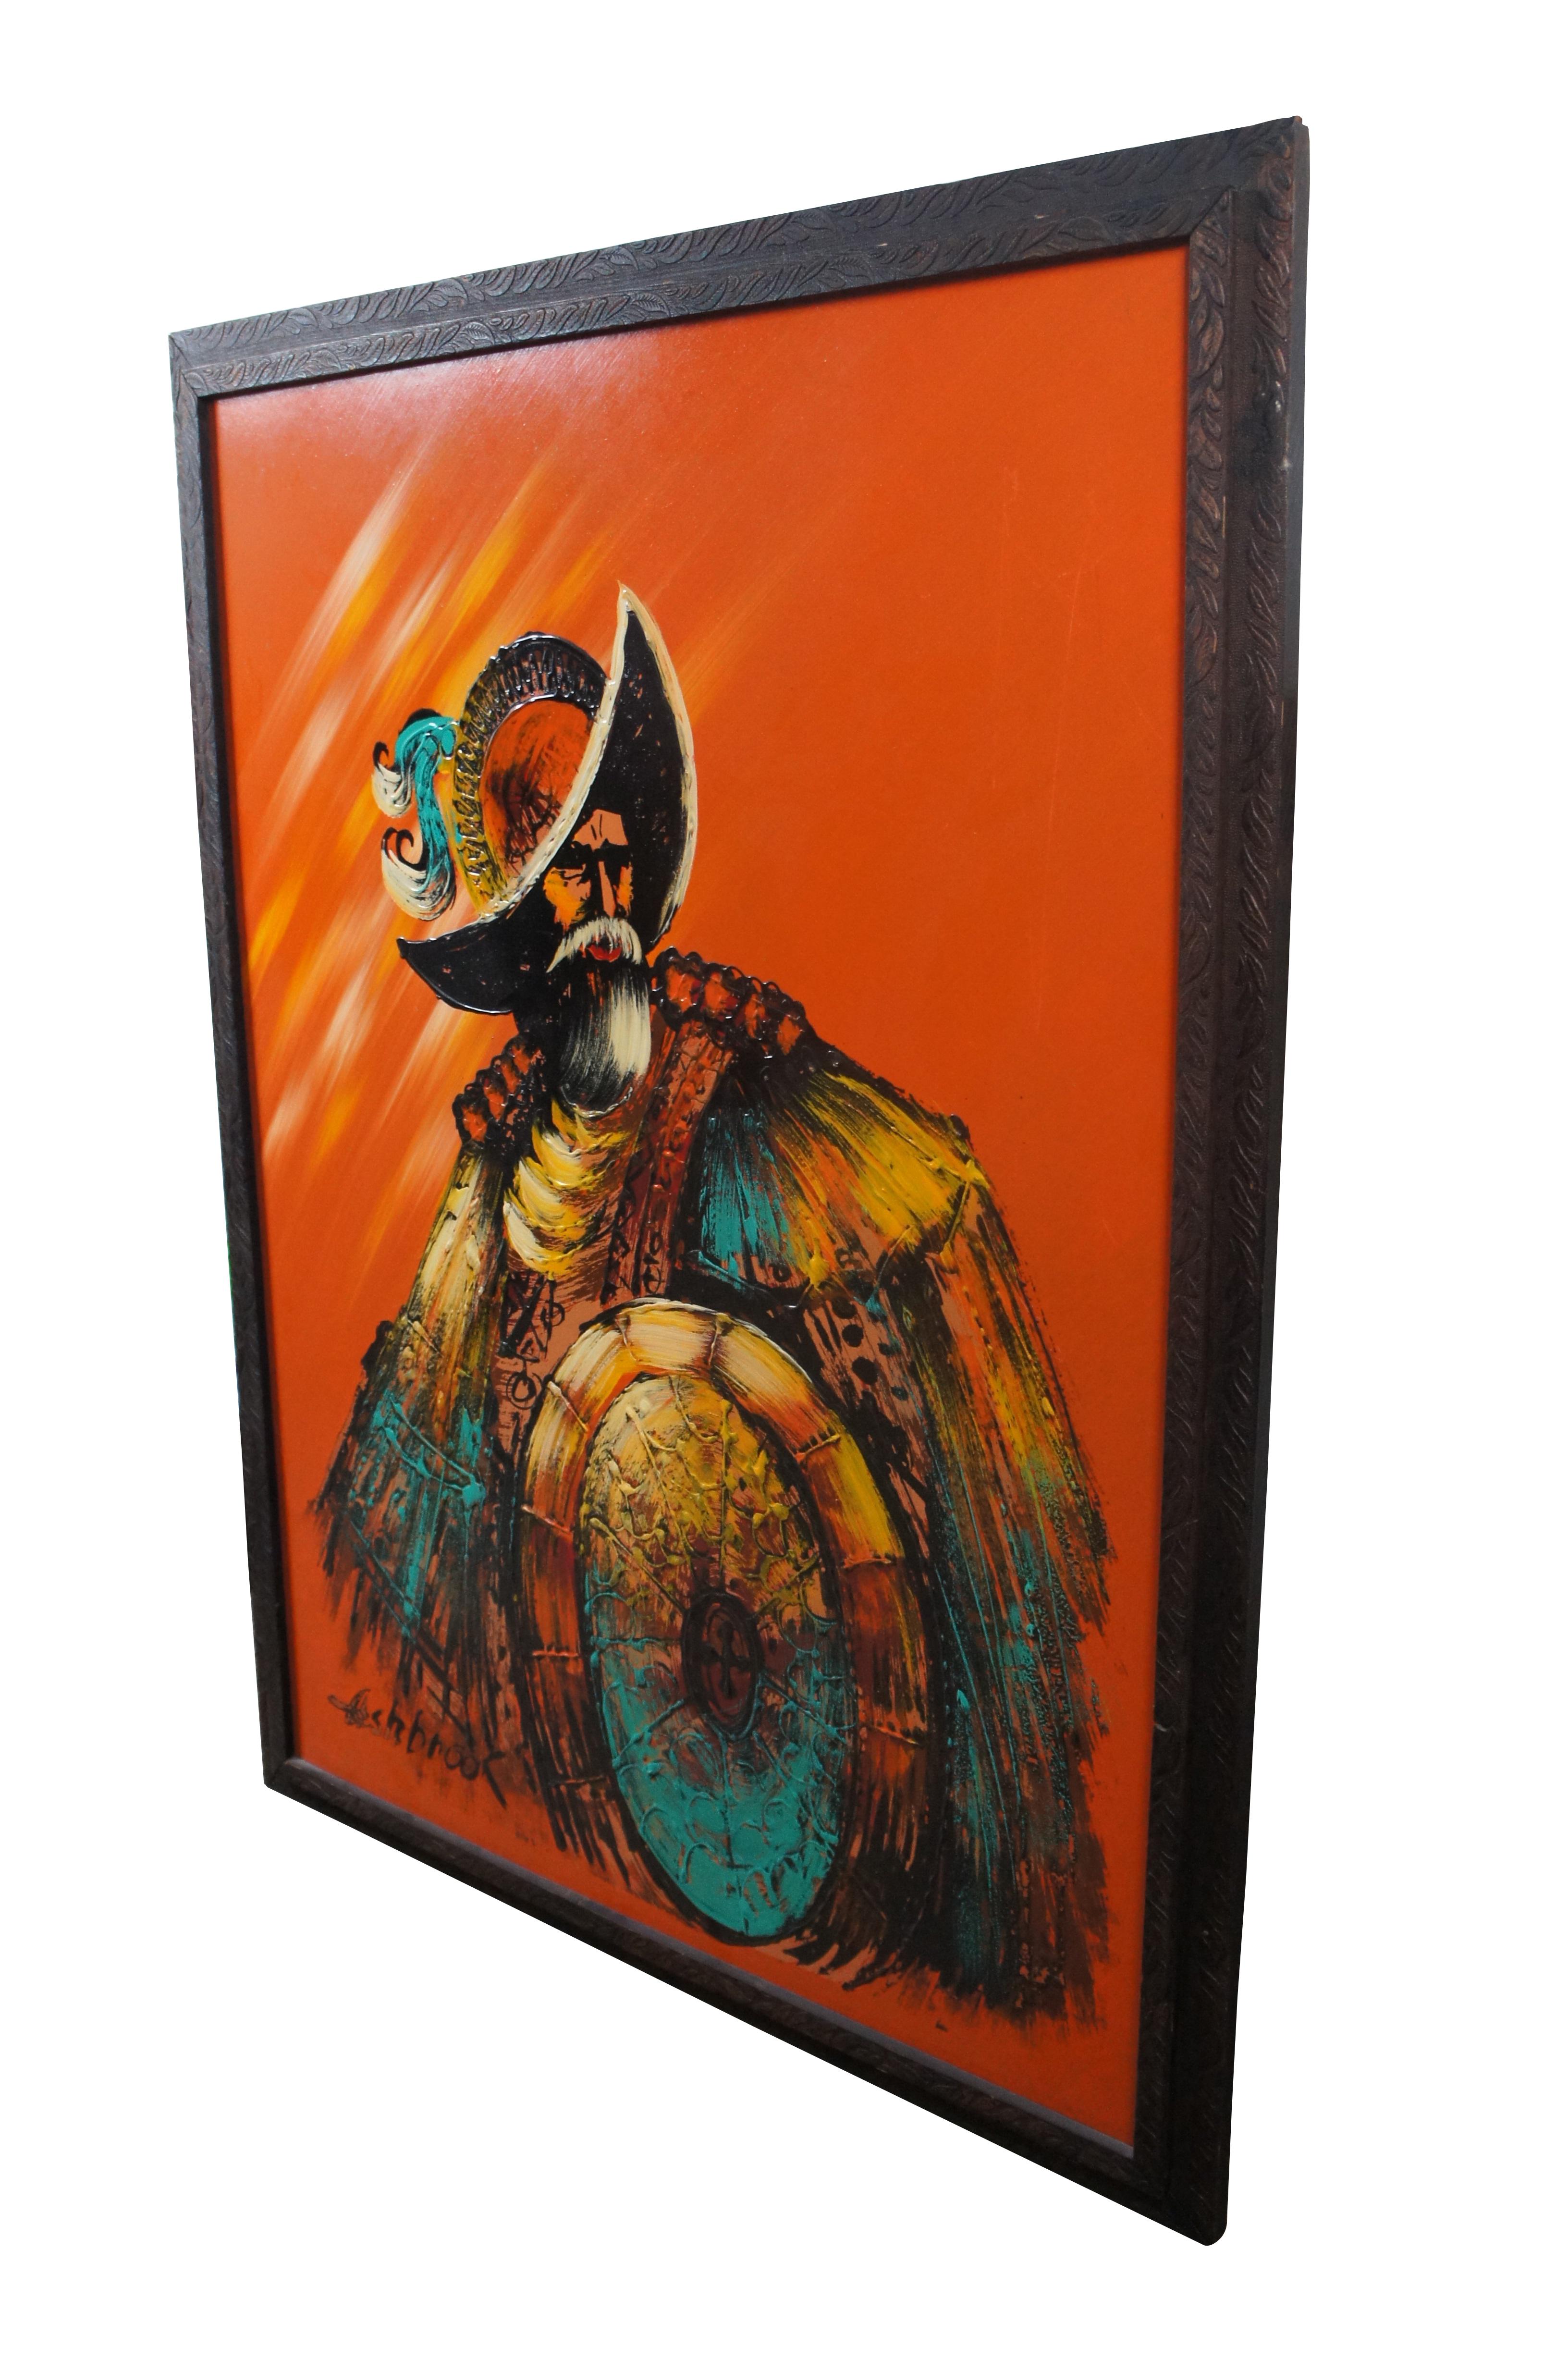 Vintage Spanish conquistador Don Quixote portrait on board by Ashbrook Studios featuring a vibrant screen print embellished with oil painting.  Ashbrook Studios, was in business from 1974 to sometime in the 1980s, in Garden Grove,